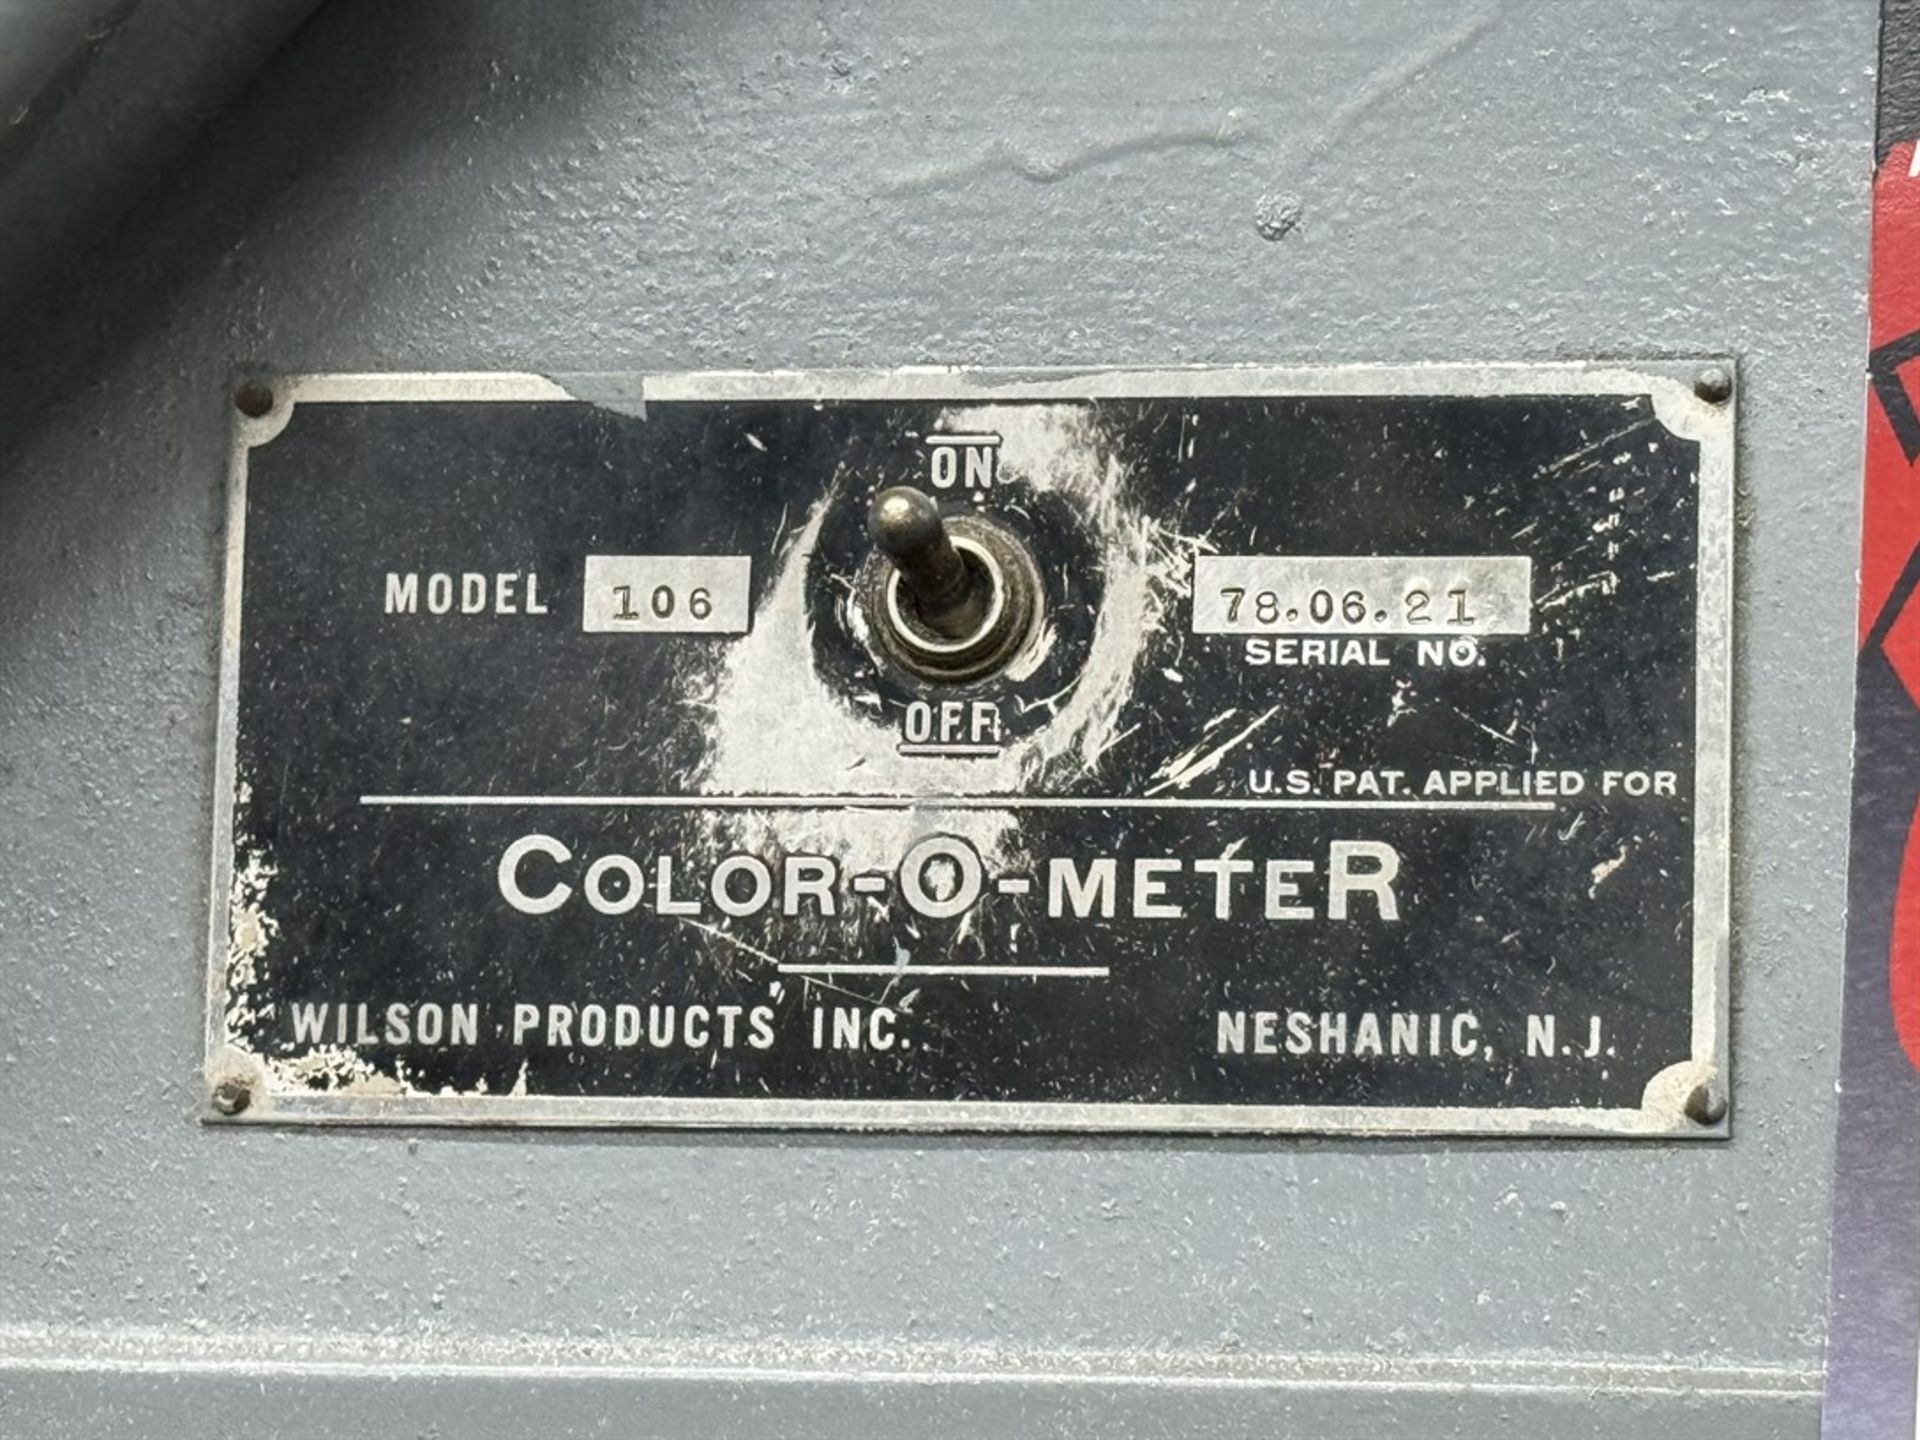 Insulation Extrusion Line (#1)-WILSON 106 Color Meter, s/n 78.06.21 - Image 3 of 3